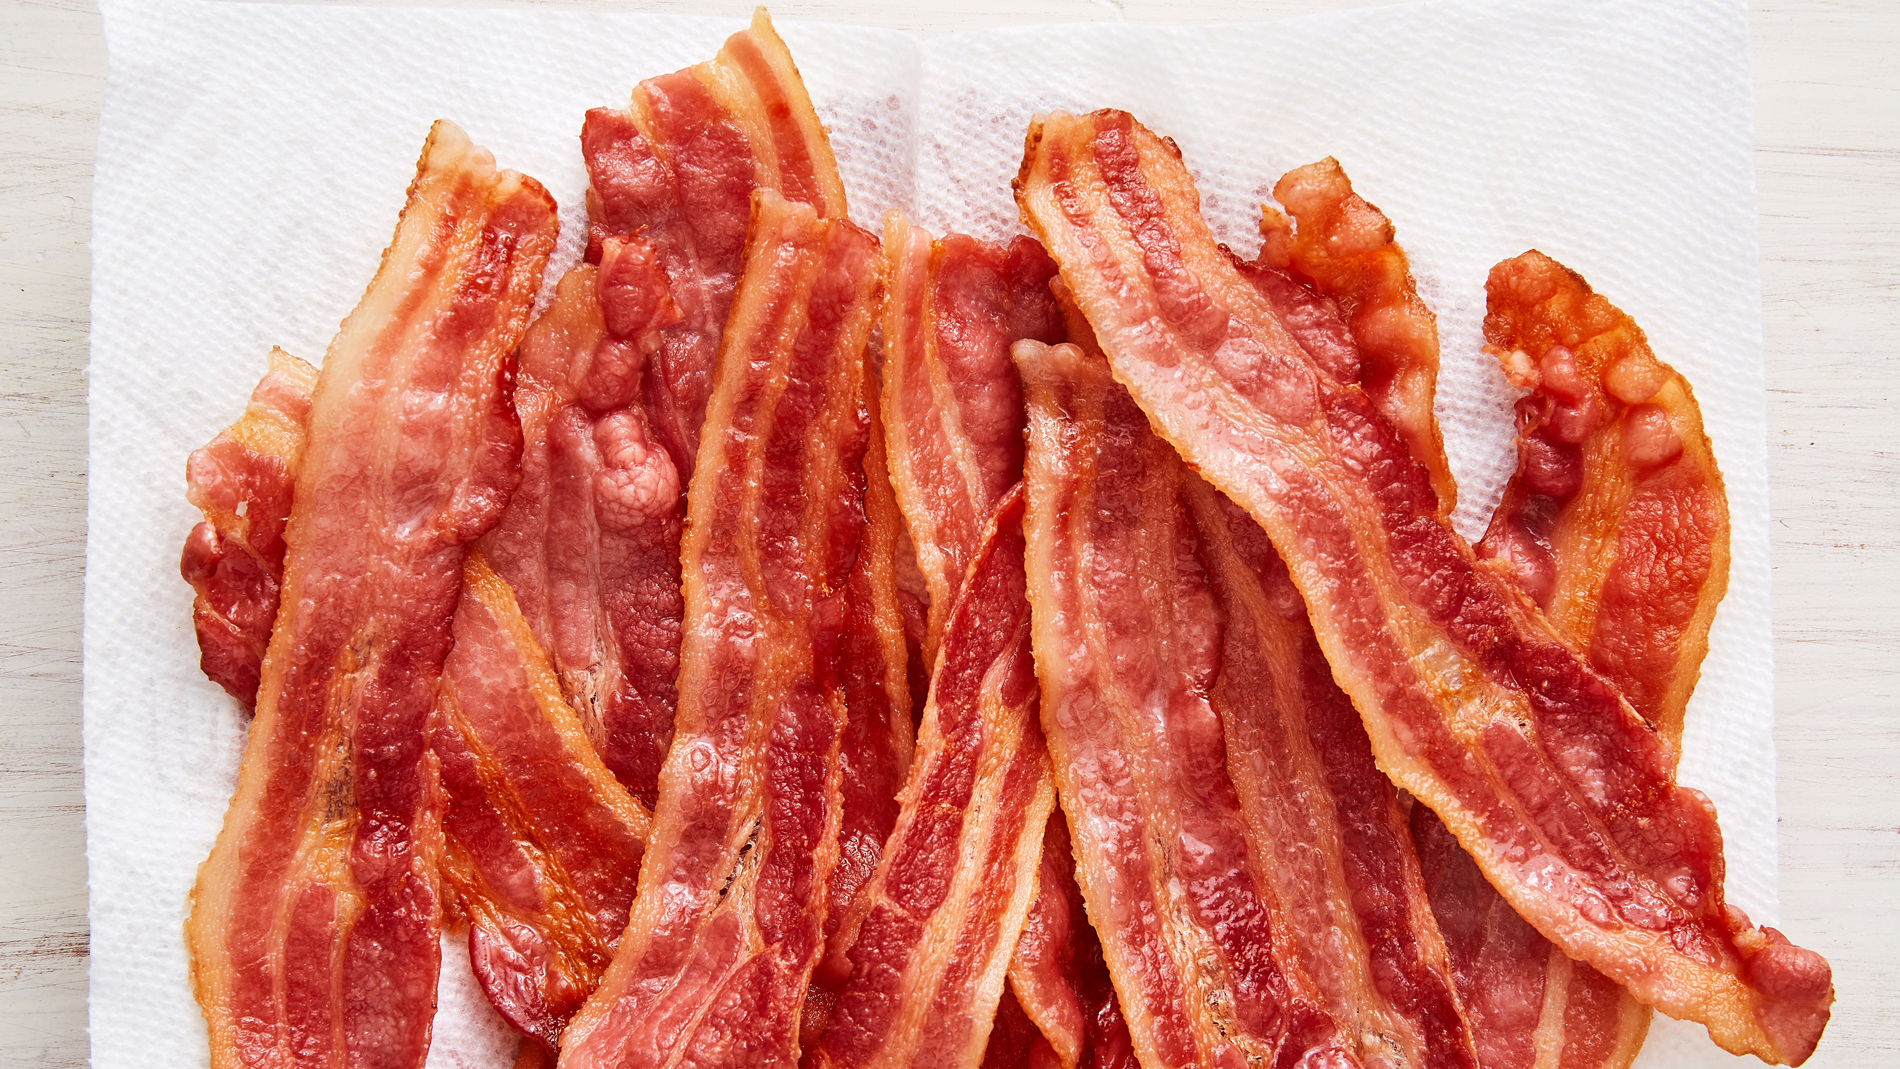 8 Steps to Making Your Own Bacon 